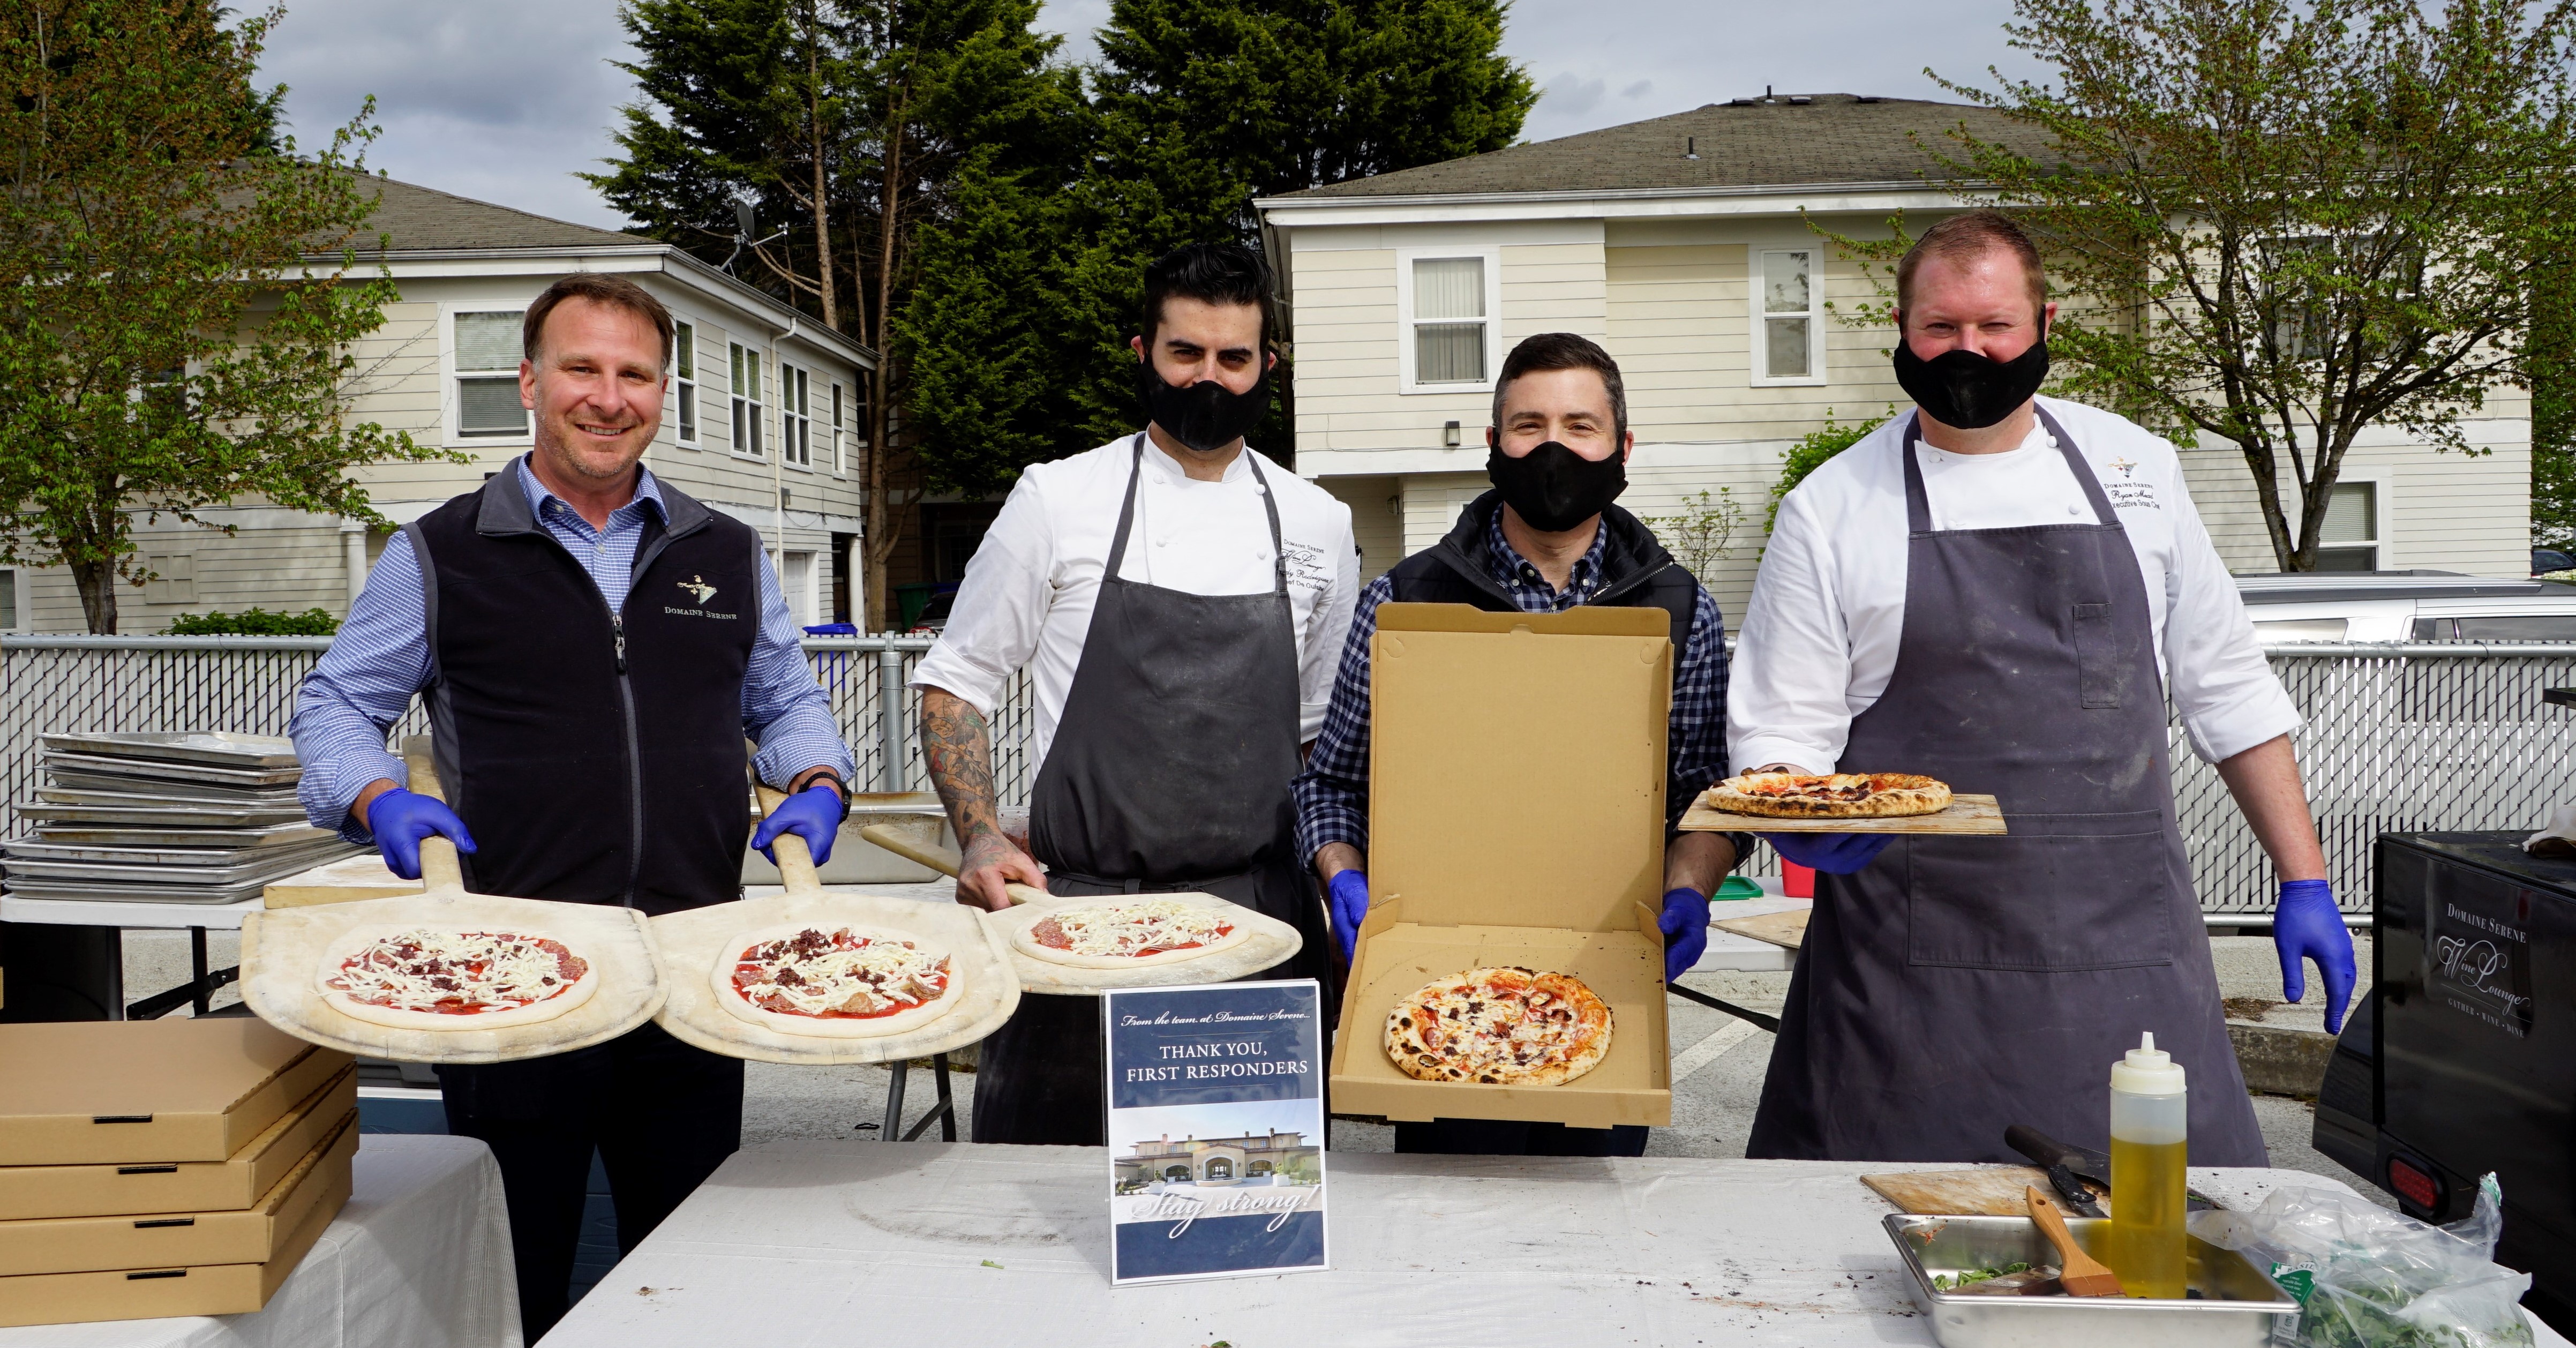 Domaine Serene is taking their mobile pizza oven on the road this week to show our thanks to local First Responders